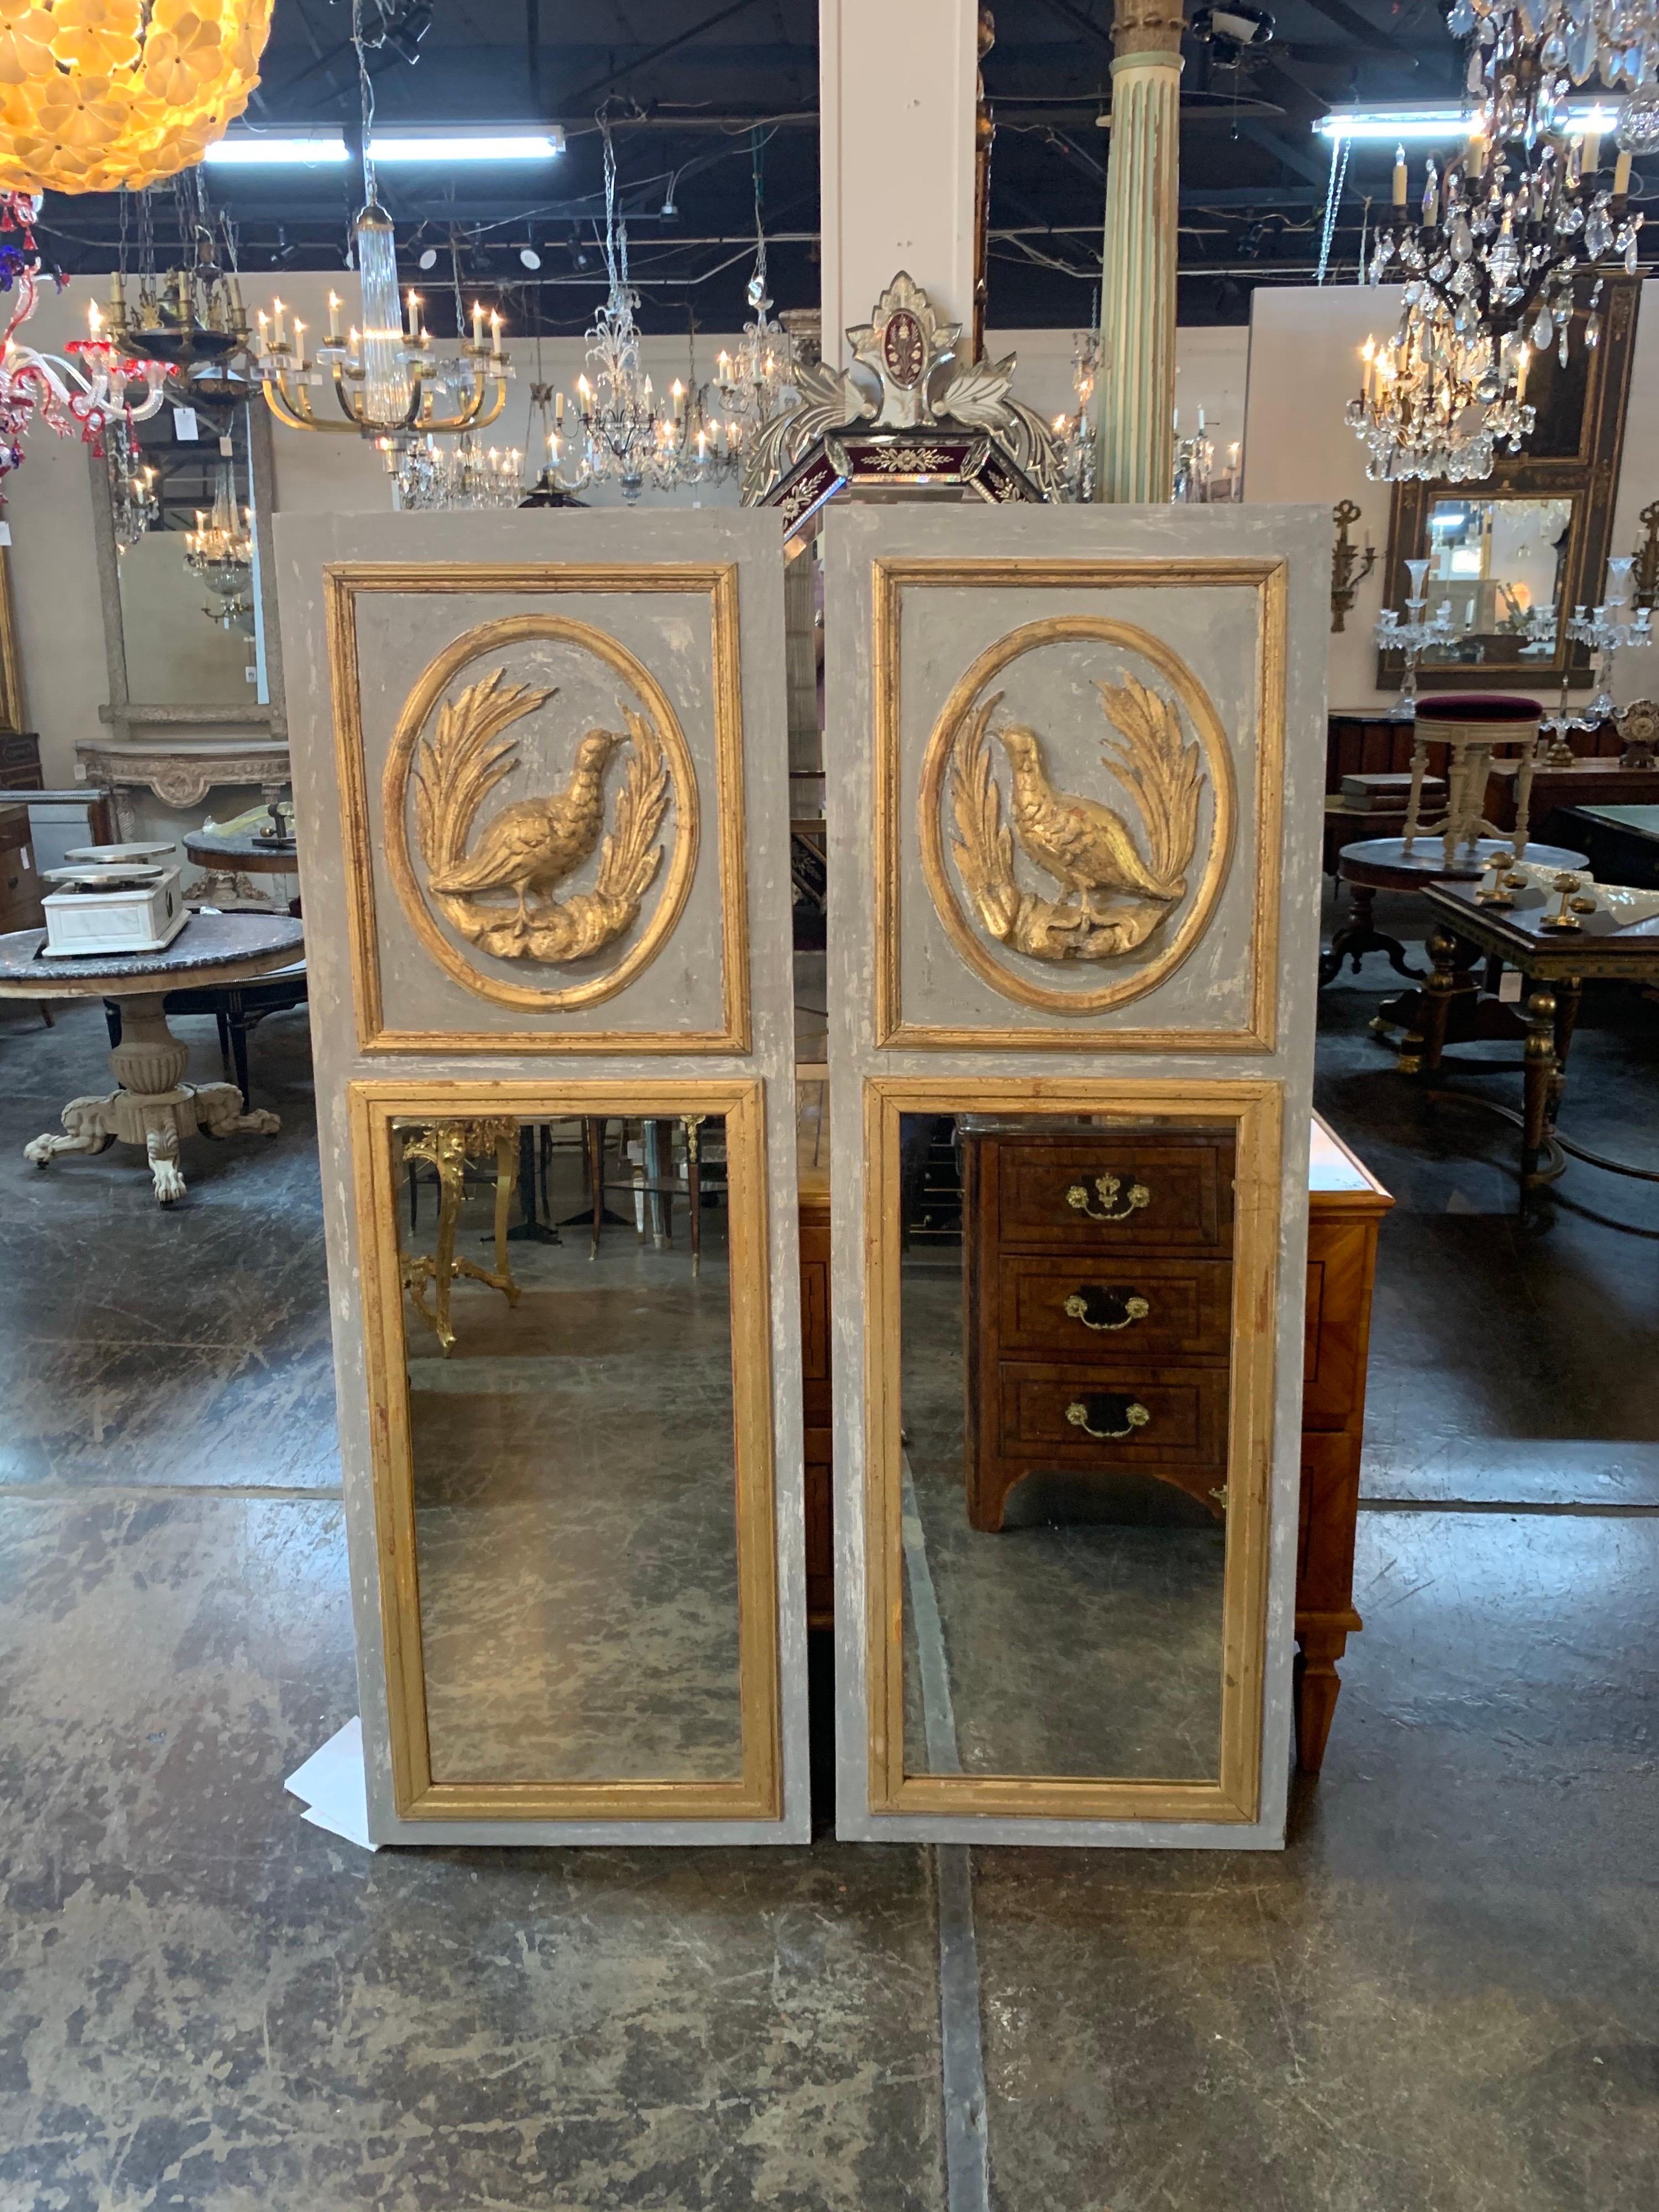 Very fine pair of Italian carved and parcel-gilt Trumeau mirrors with birds. Painted in a nice shade of grey with pretty carvings of birds and leaves. A fabulous decorative element!